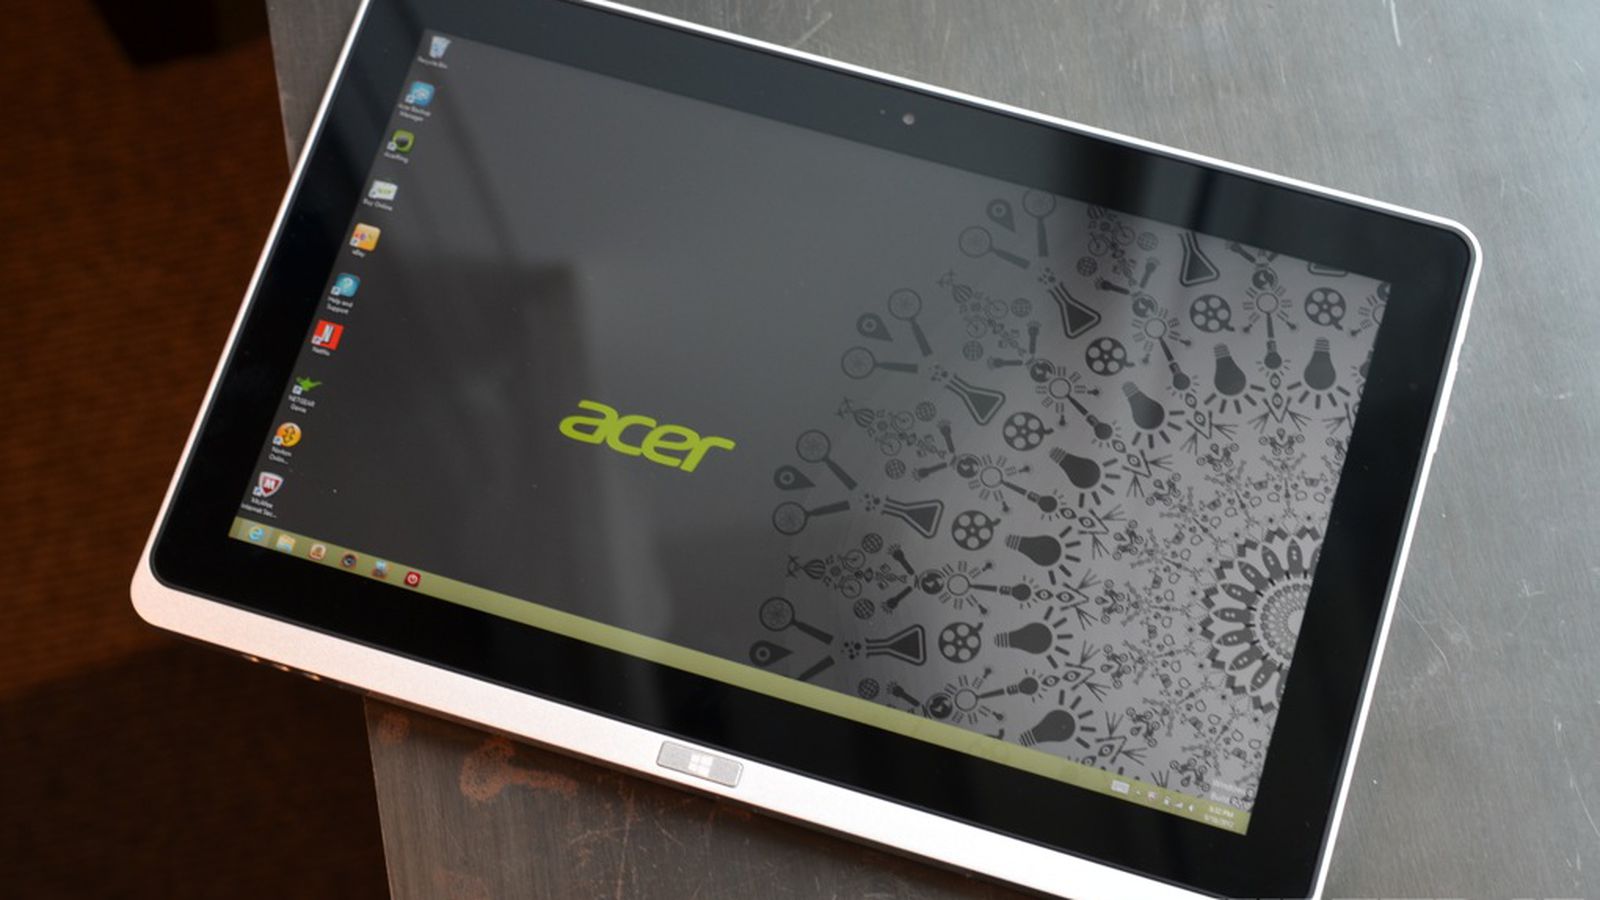 Acer Iconia W700 Windows 8 tablet launching on October 26th for $799.99 - The Verge